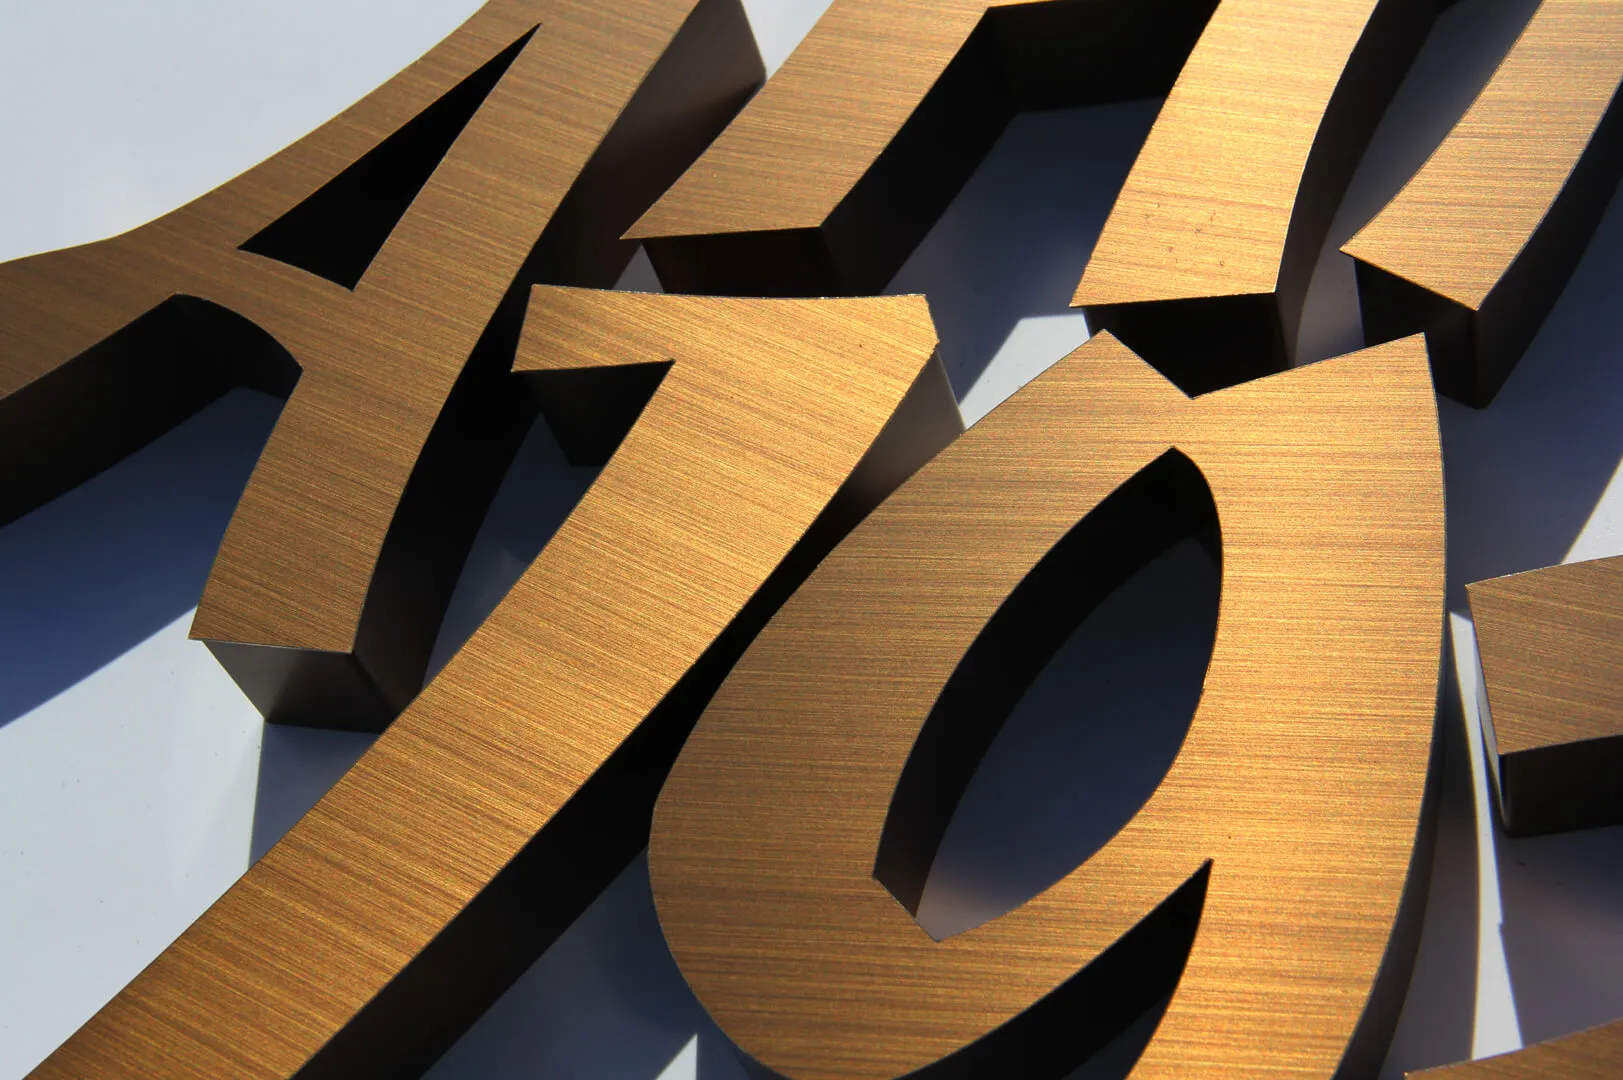 Numbers and letters made of stainless steel in brushed bronze.